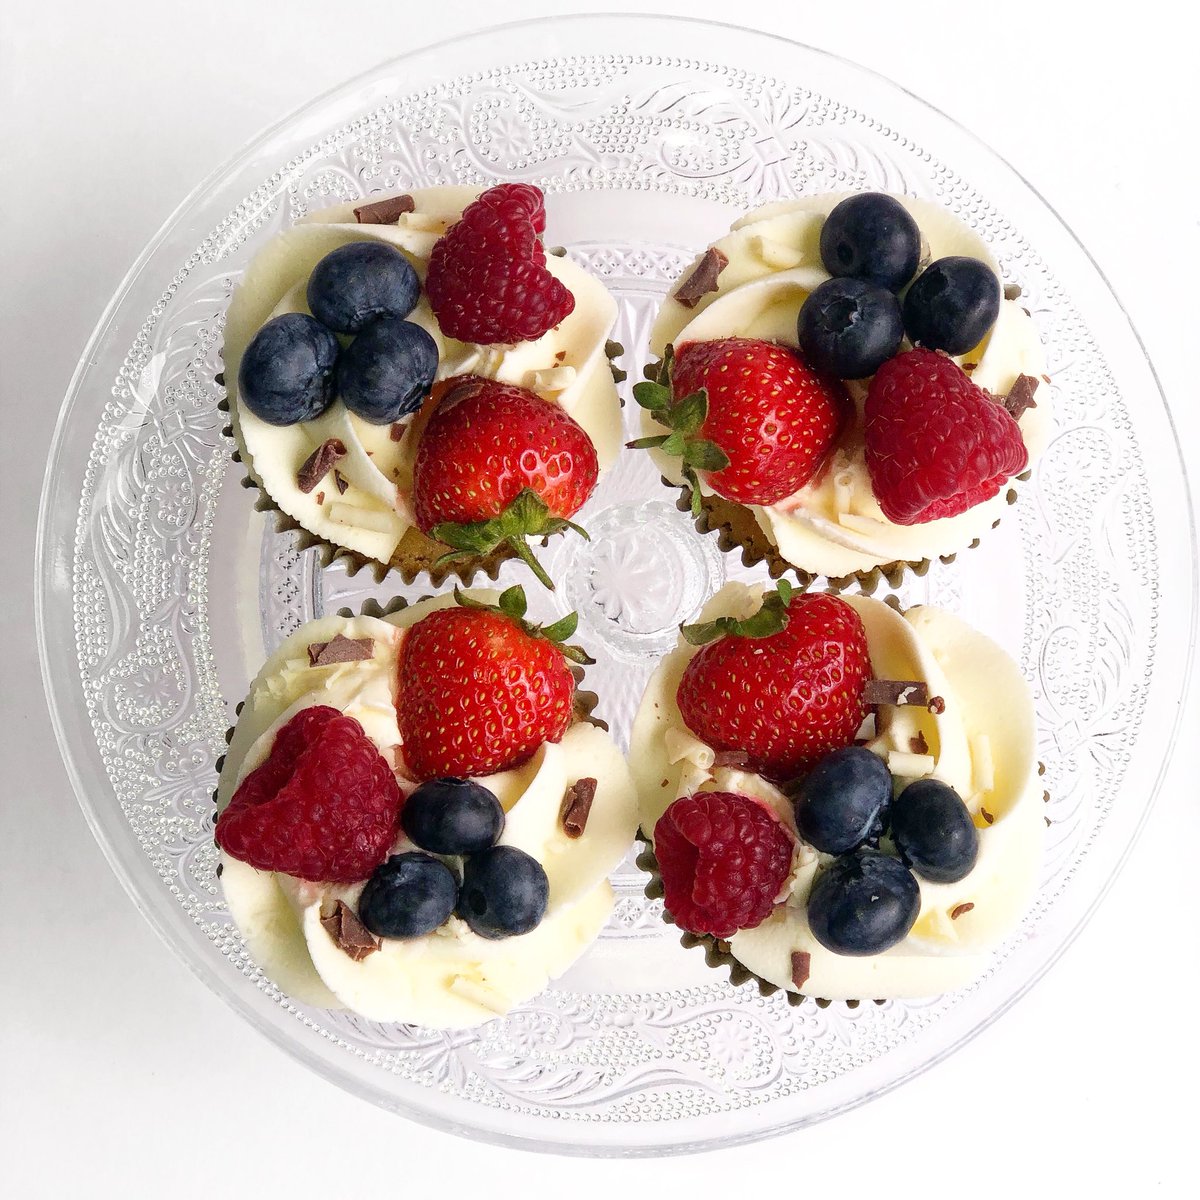 Relive your Summer Holidays by ordering our Summer Berries Cupcakes 🍓🍒 Vanilla Cupcakes decorated with quality fresh fruit 😋Get yours now by sending us an email, link in the bio 💌✨ #cakes #cupcakes #londonbaker